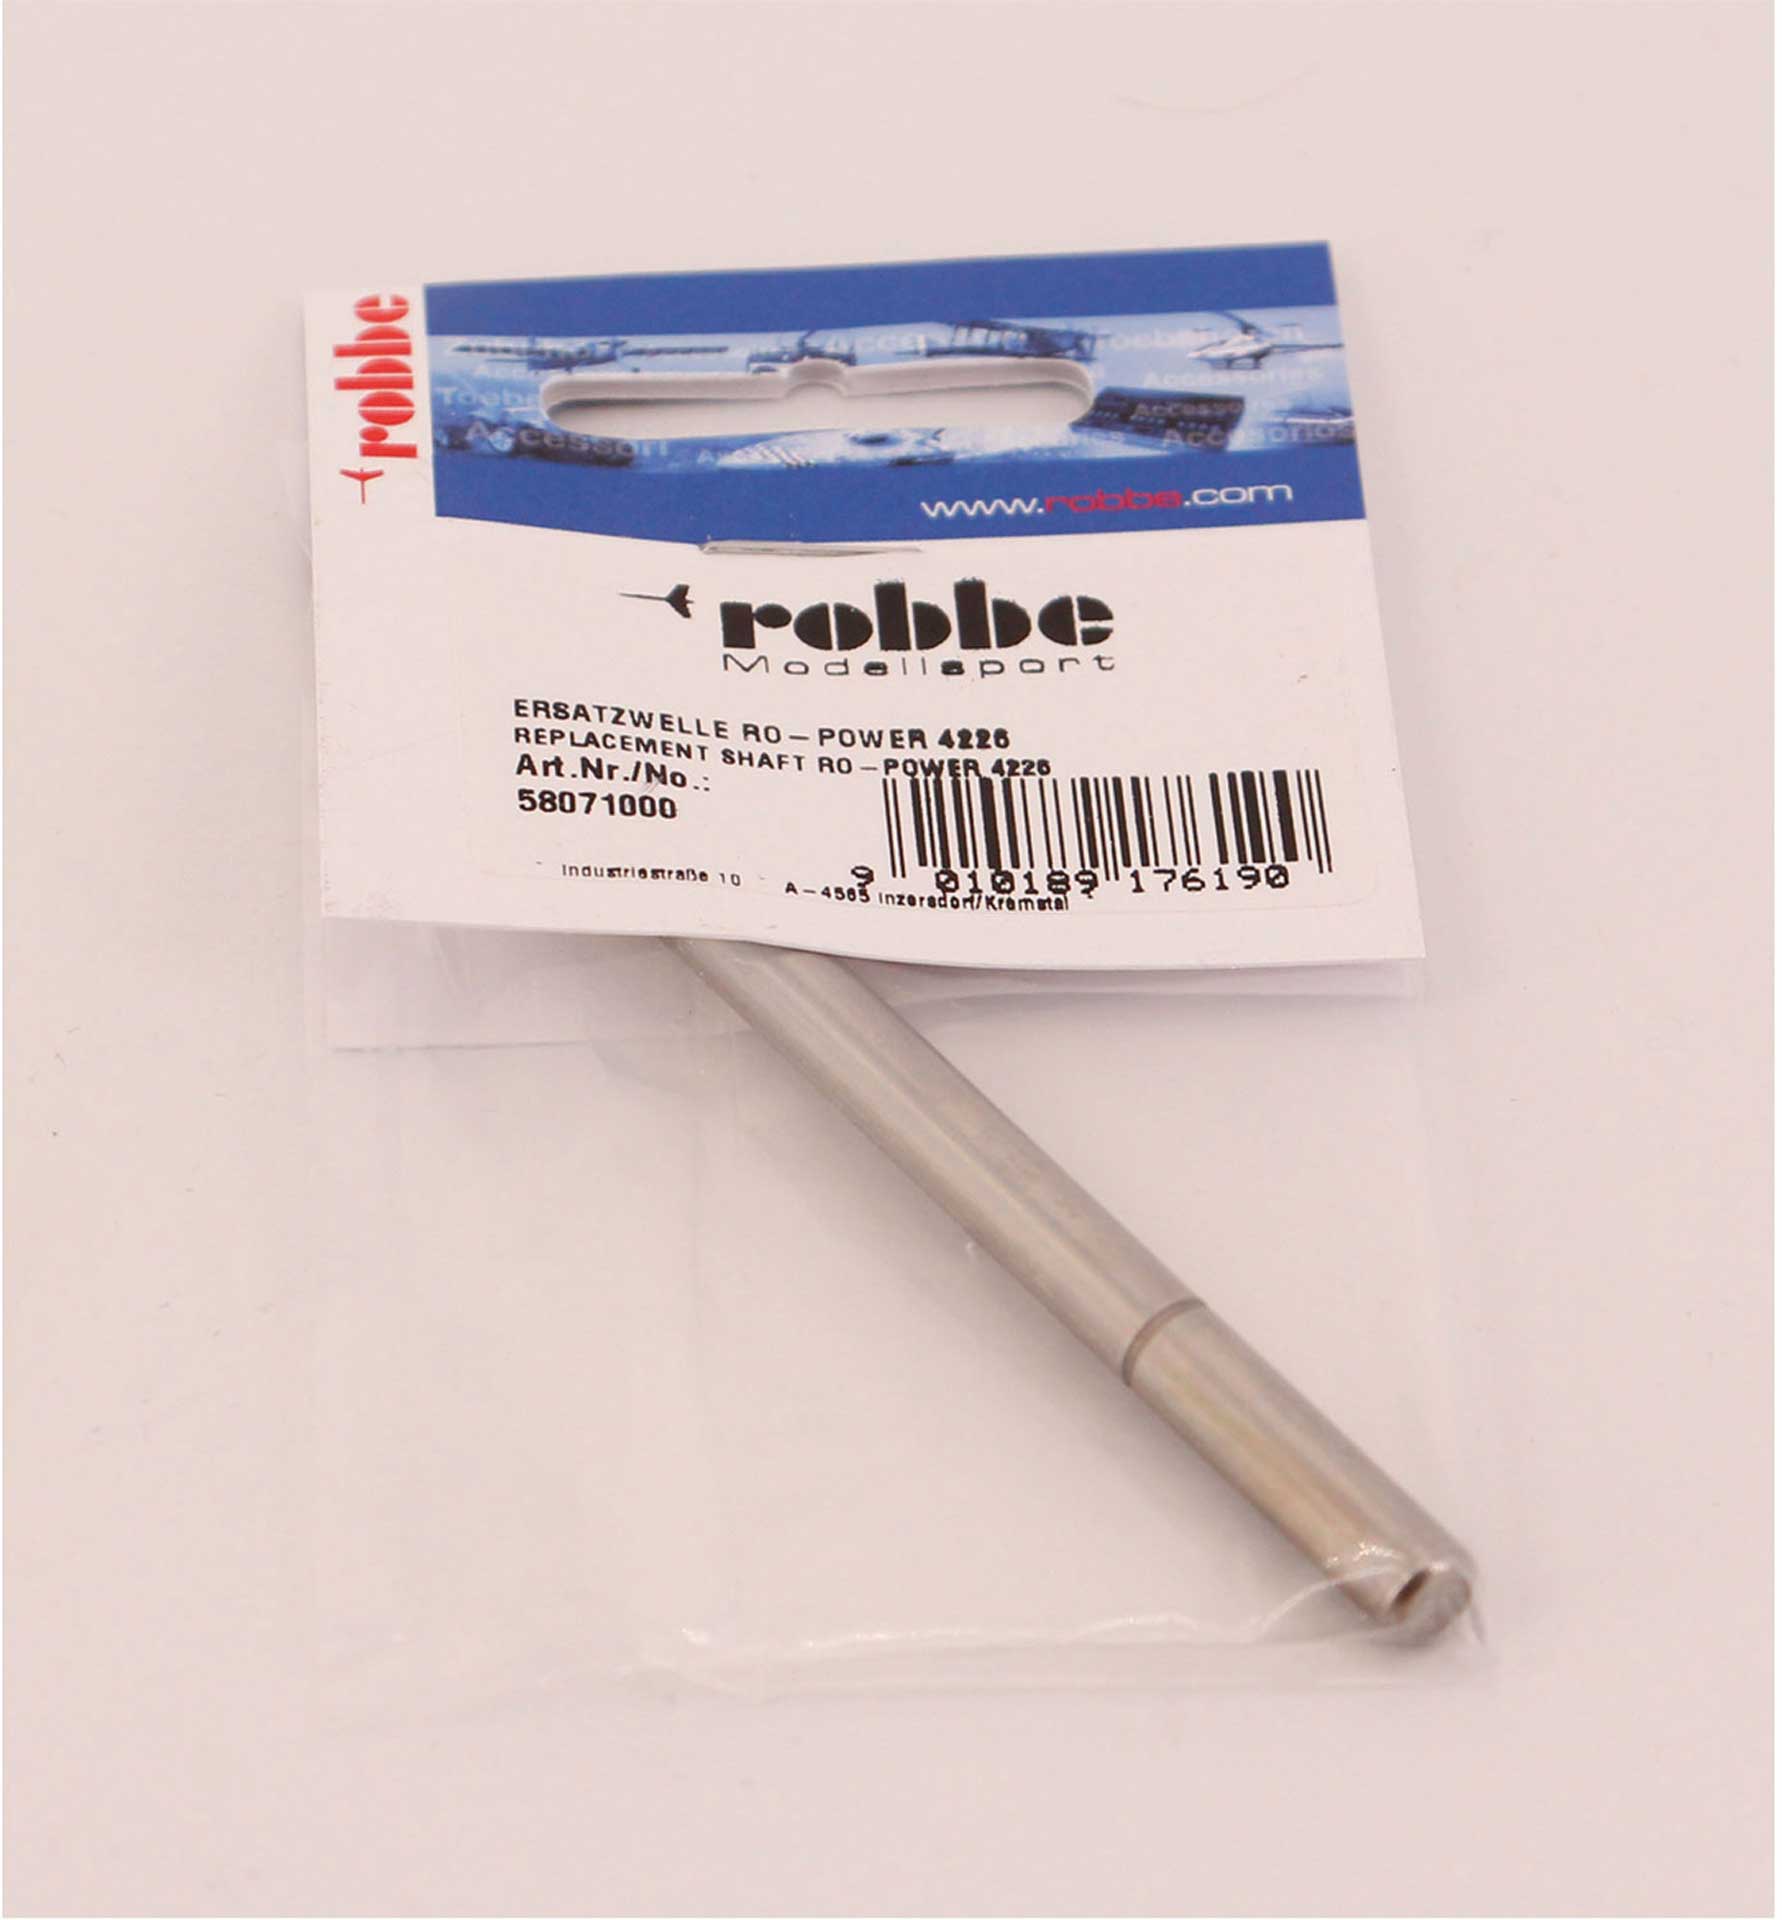 Robbe Modellsport REPLACEMENT SHAFT RO-POWER 4226